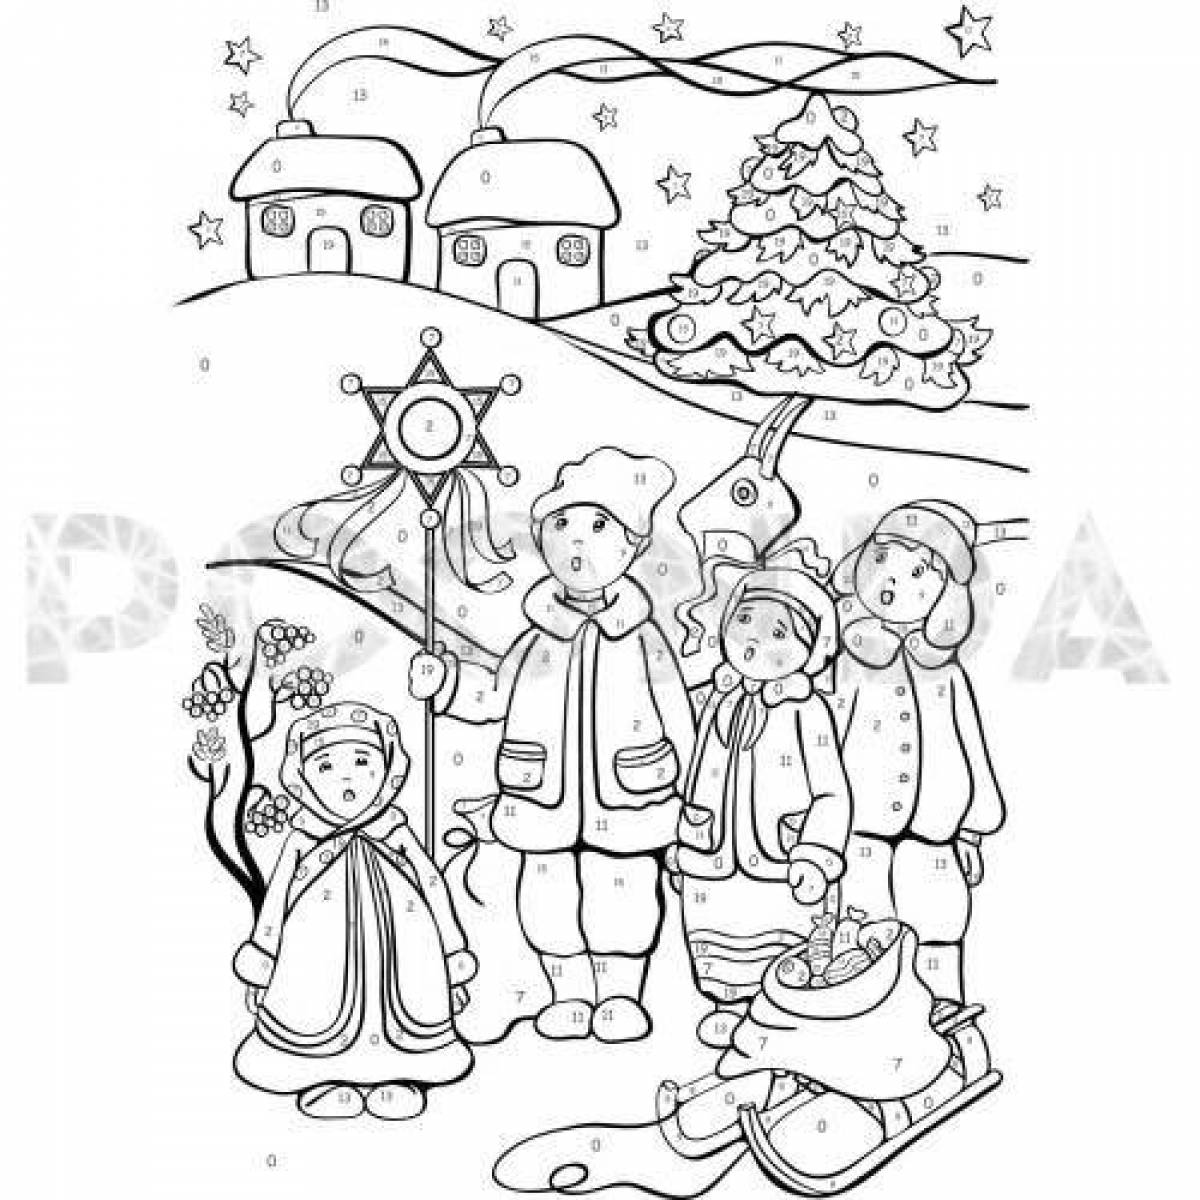 Exciting carol coloring pages for kids